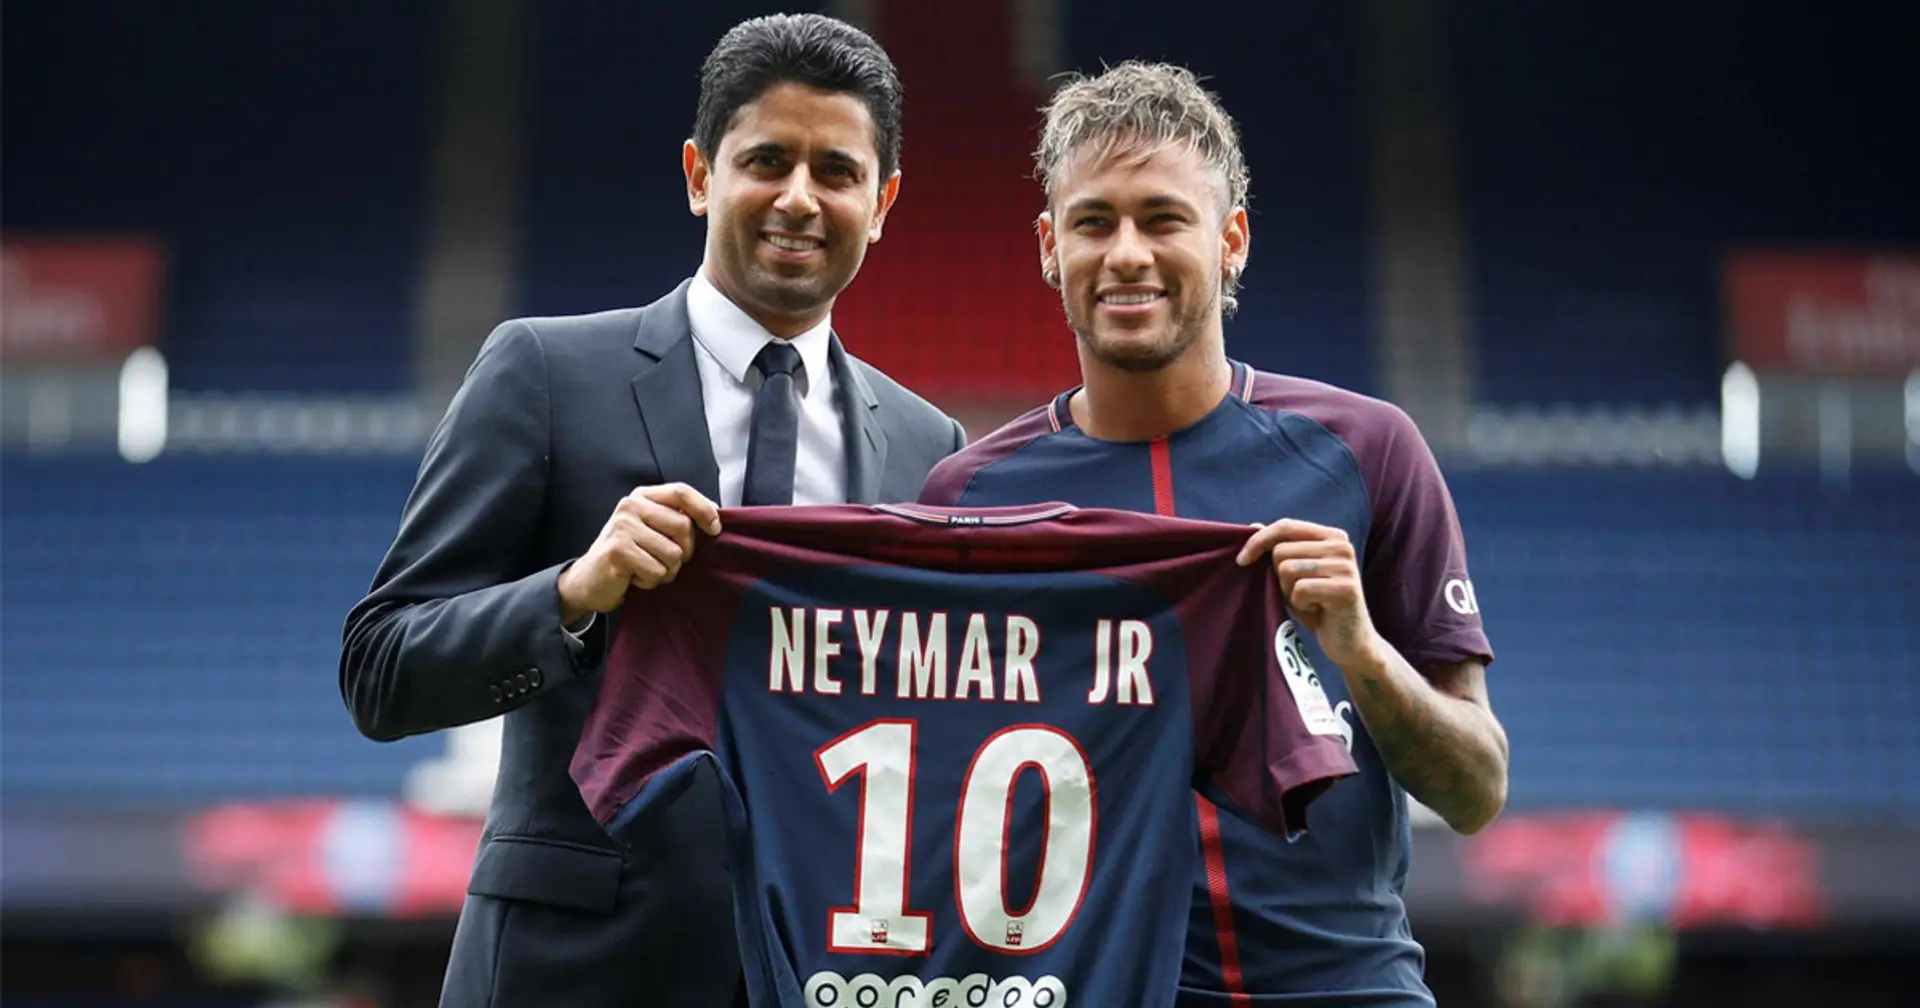 3 ways Barca can get revenge on PSG for Neymar other than buying him back